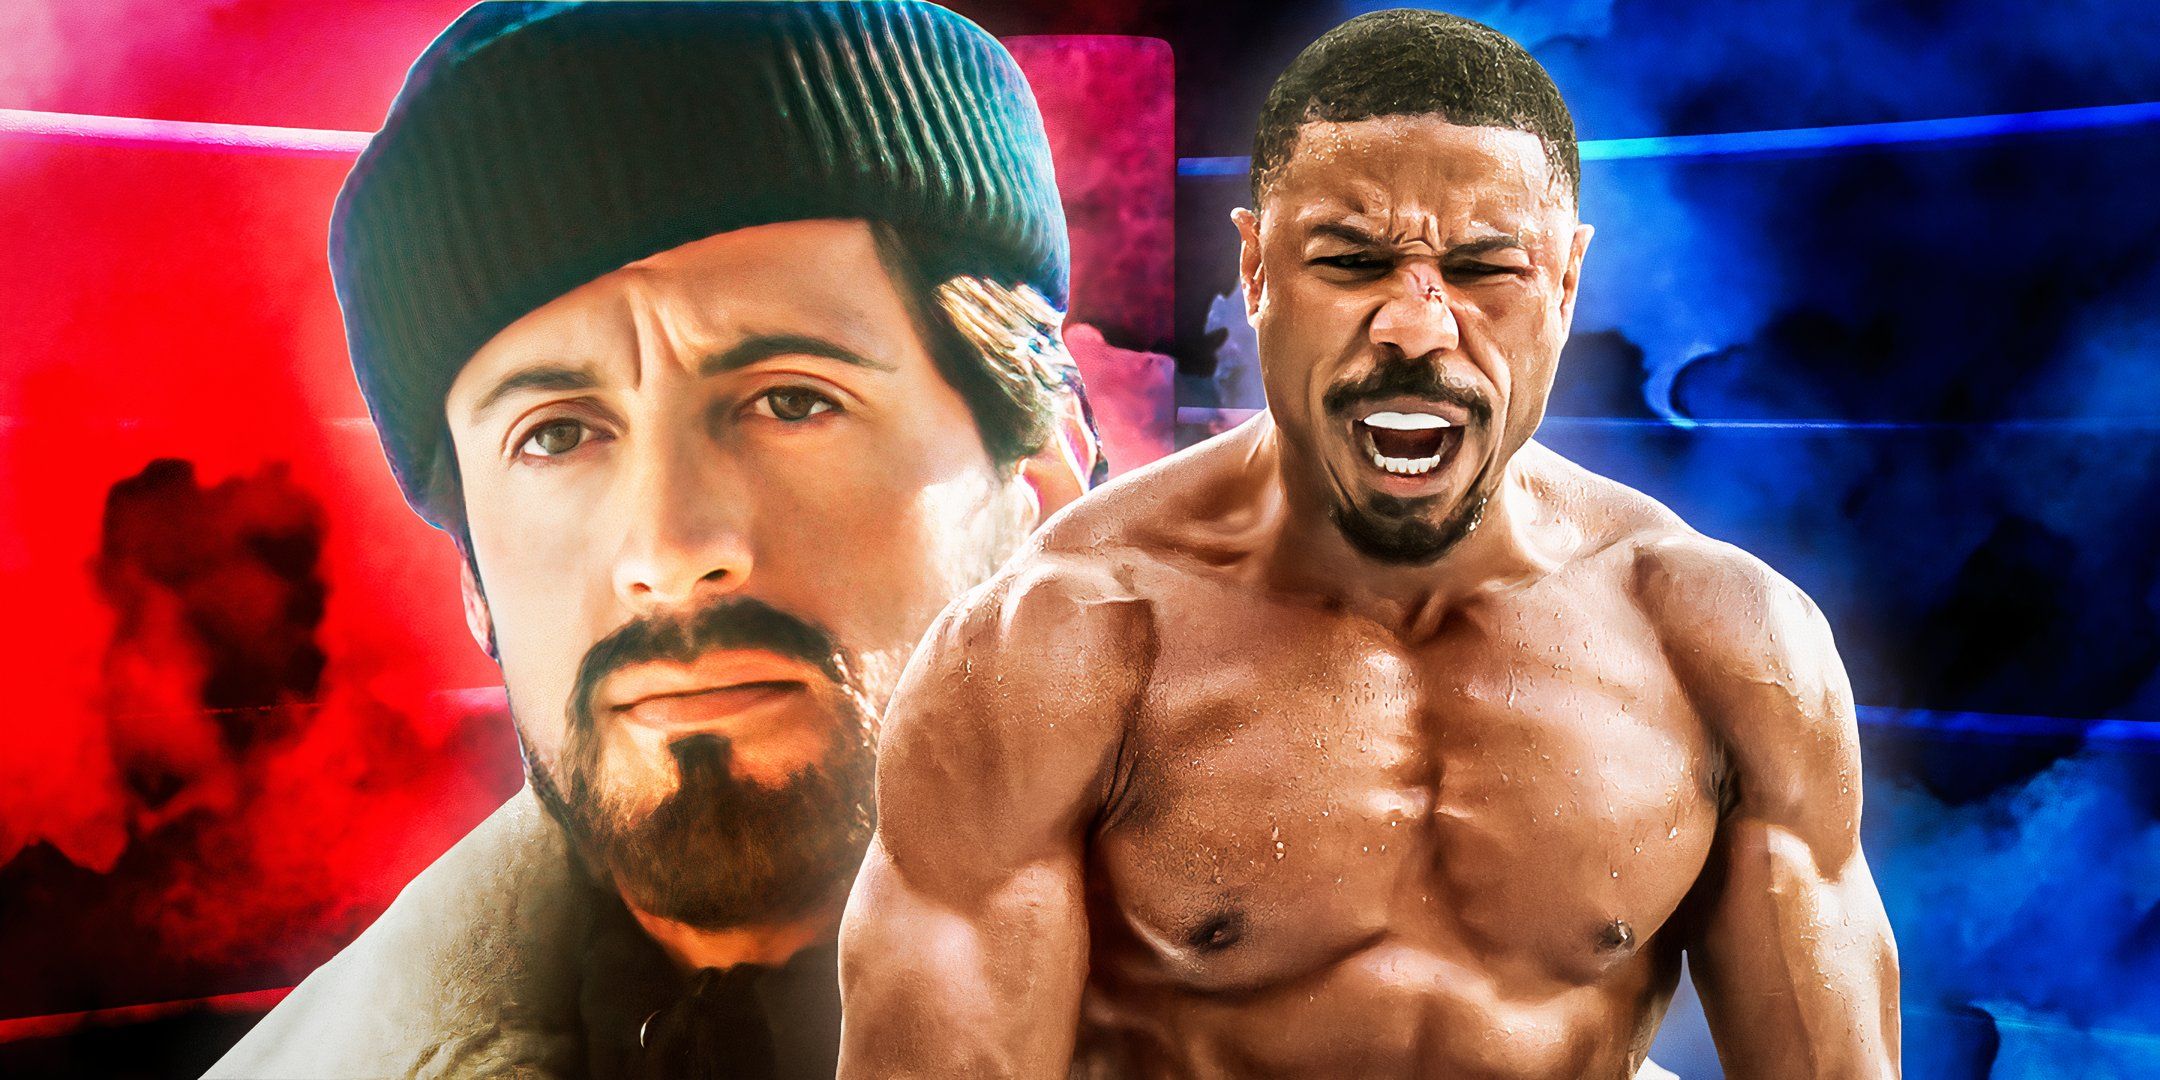 (Michael B. Jordan as Adonis Creed) from Creed III and (Sylvester Stallone as Rocky Balboa) from Rocky IV